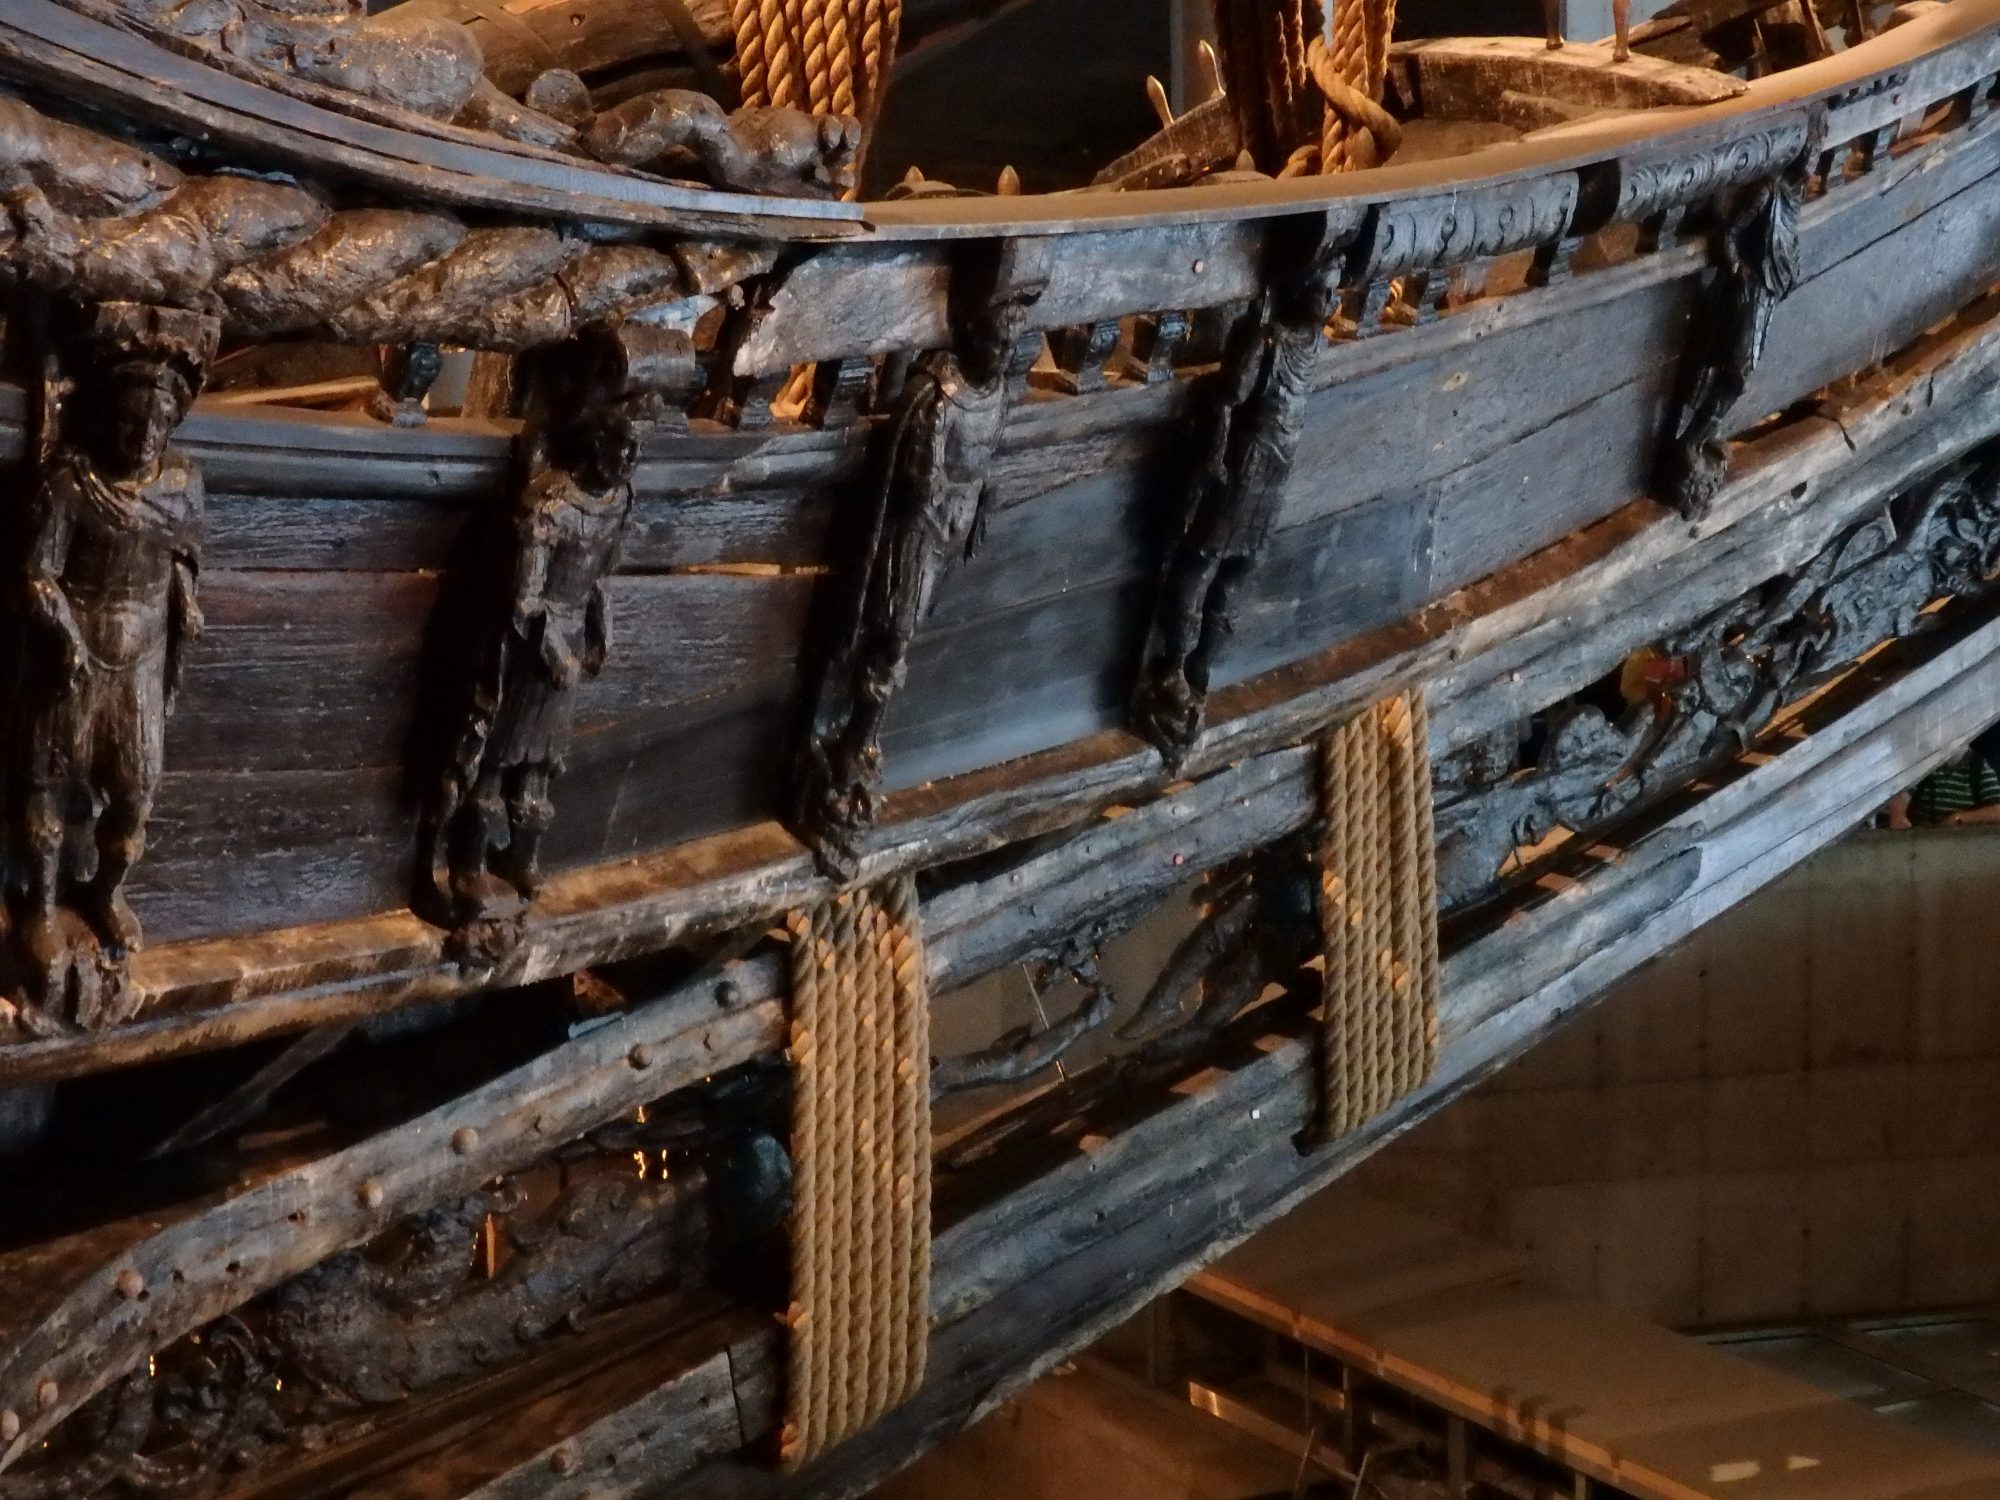 A row of carvings of Roman Emperors on the Vasa: Stockholm, Sweden